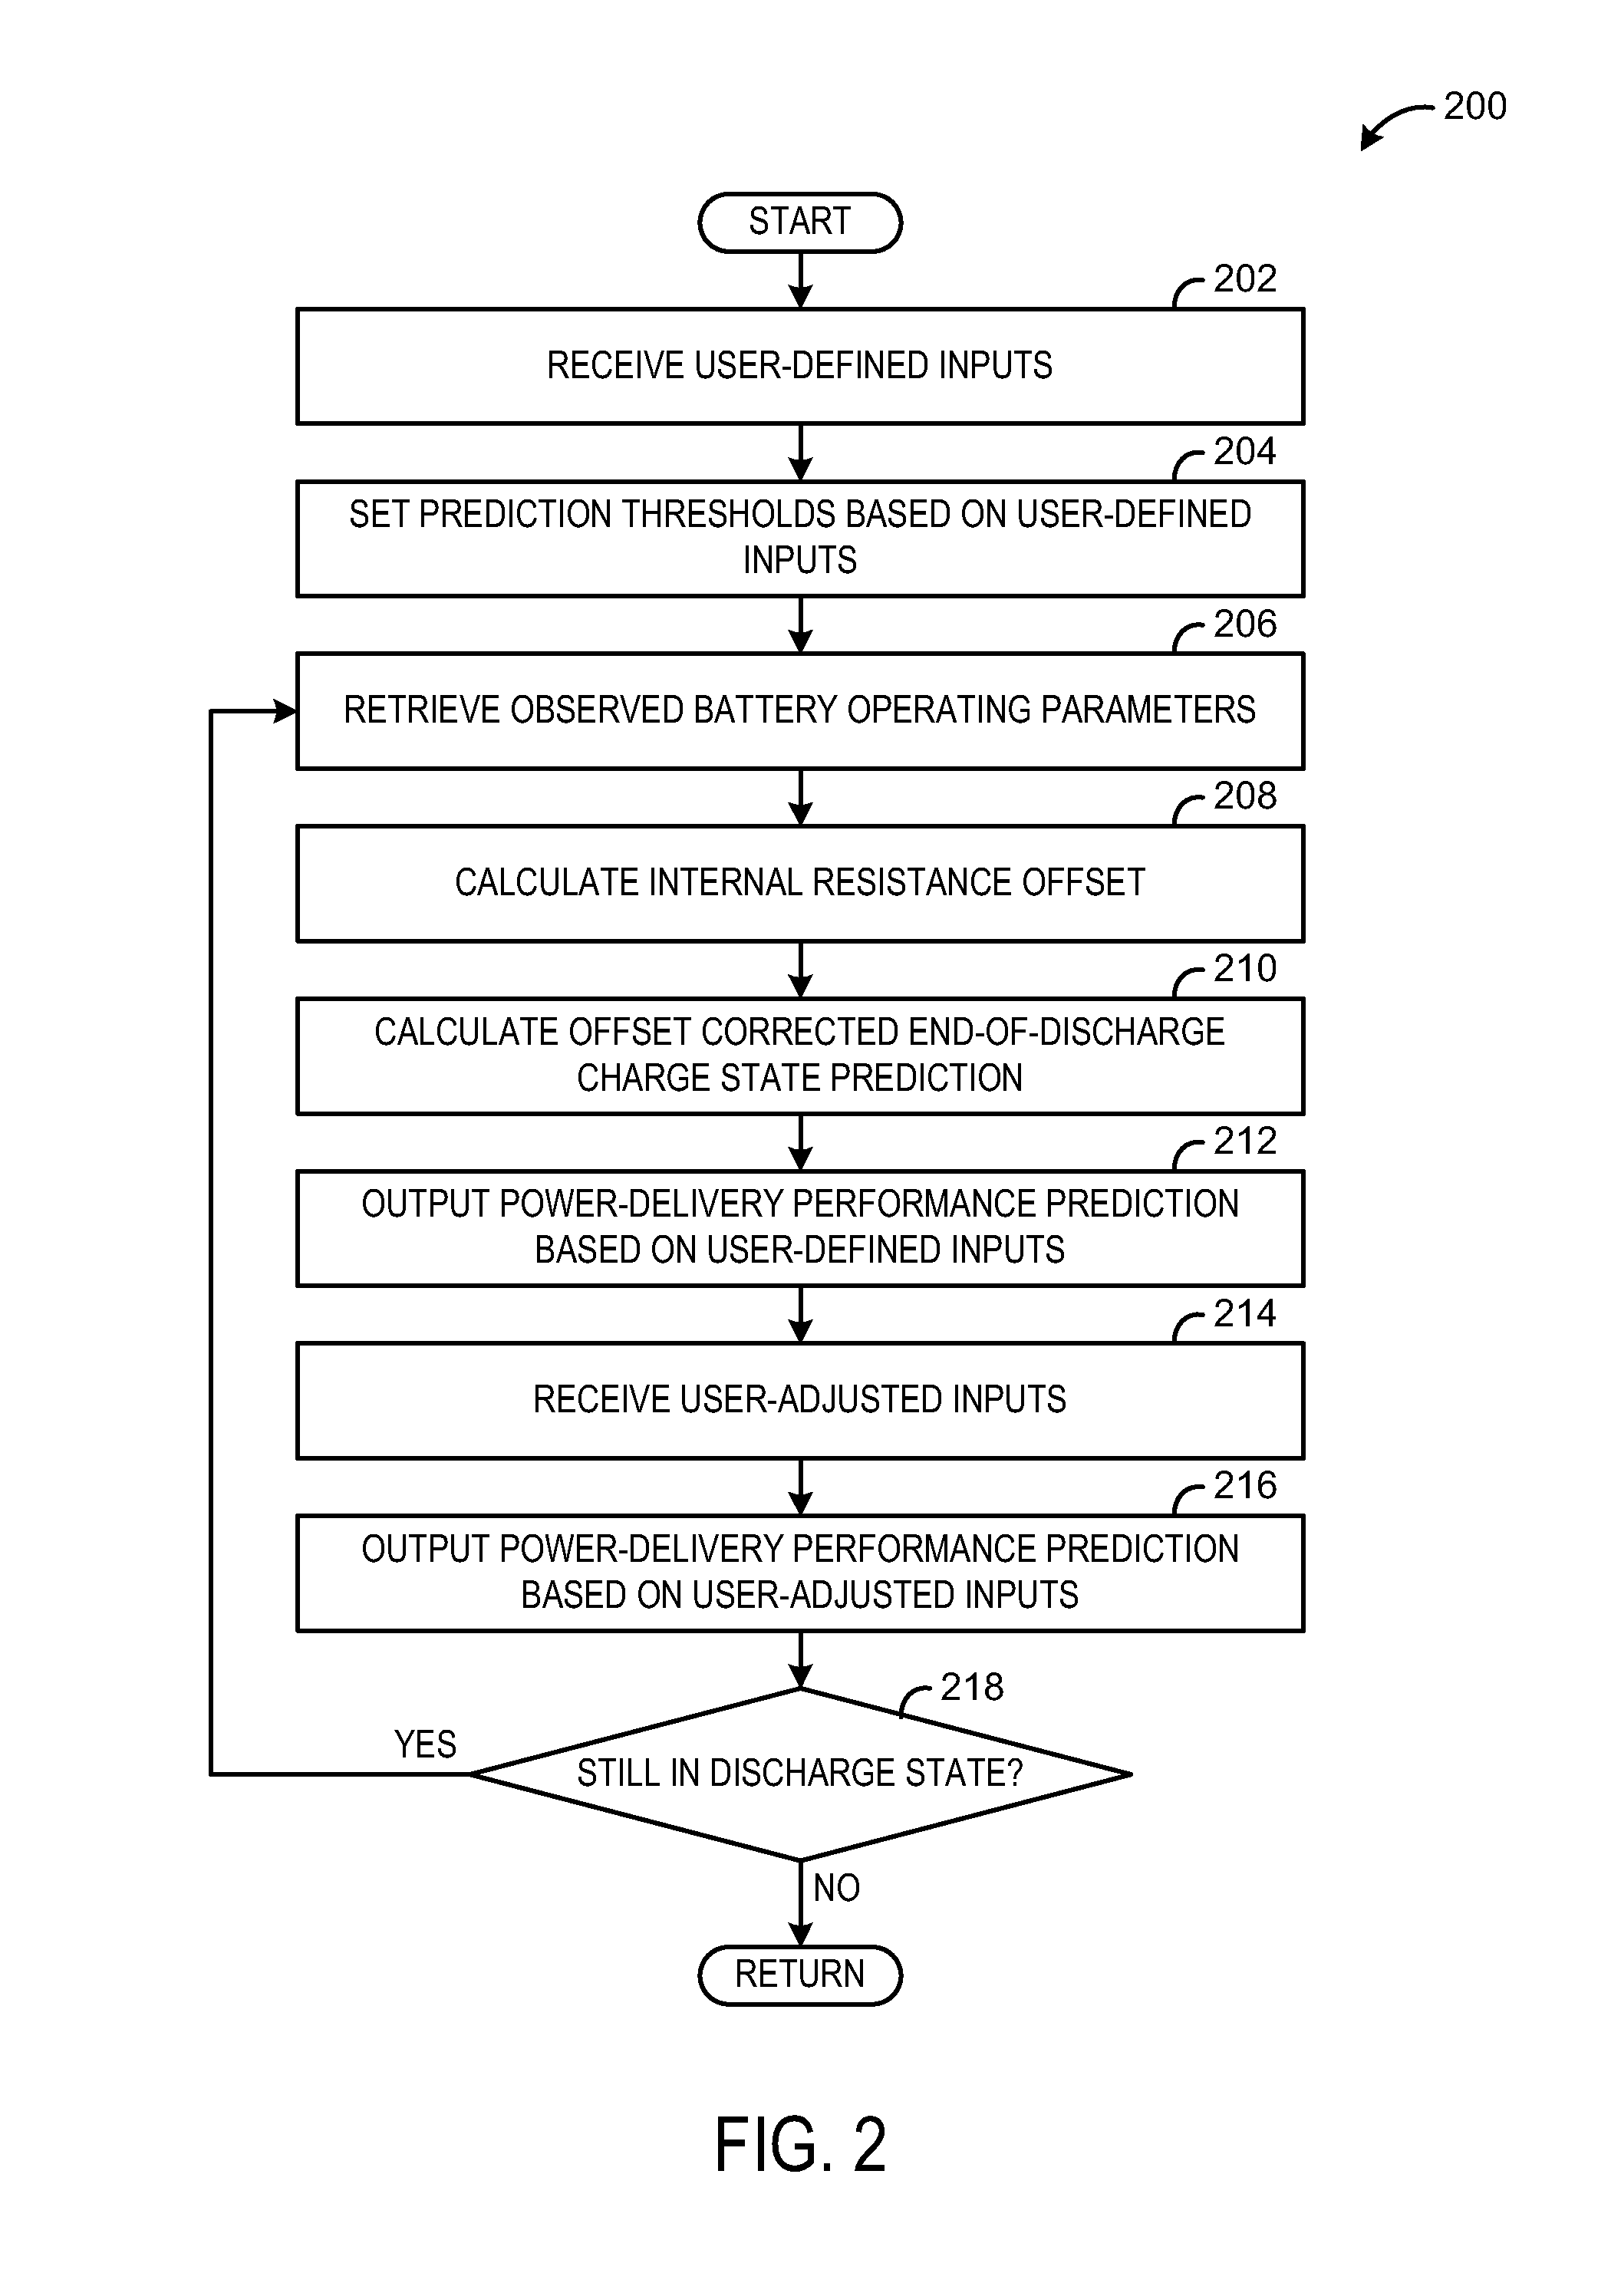 Systems and methods for predicting battery power-delivery performance